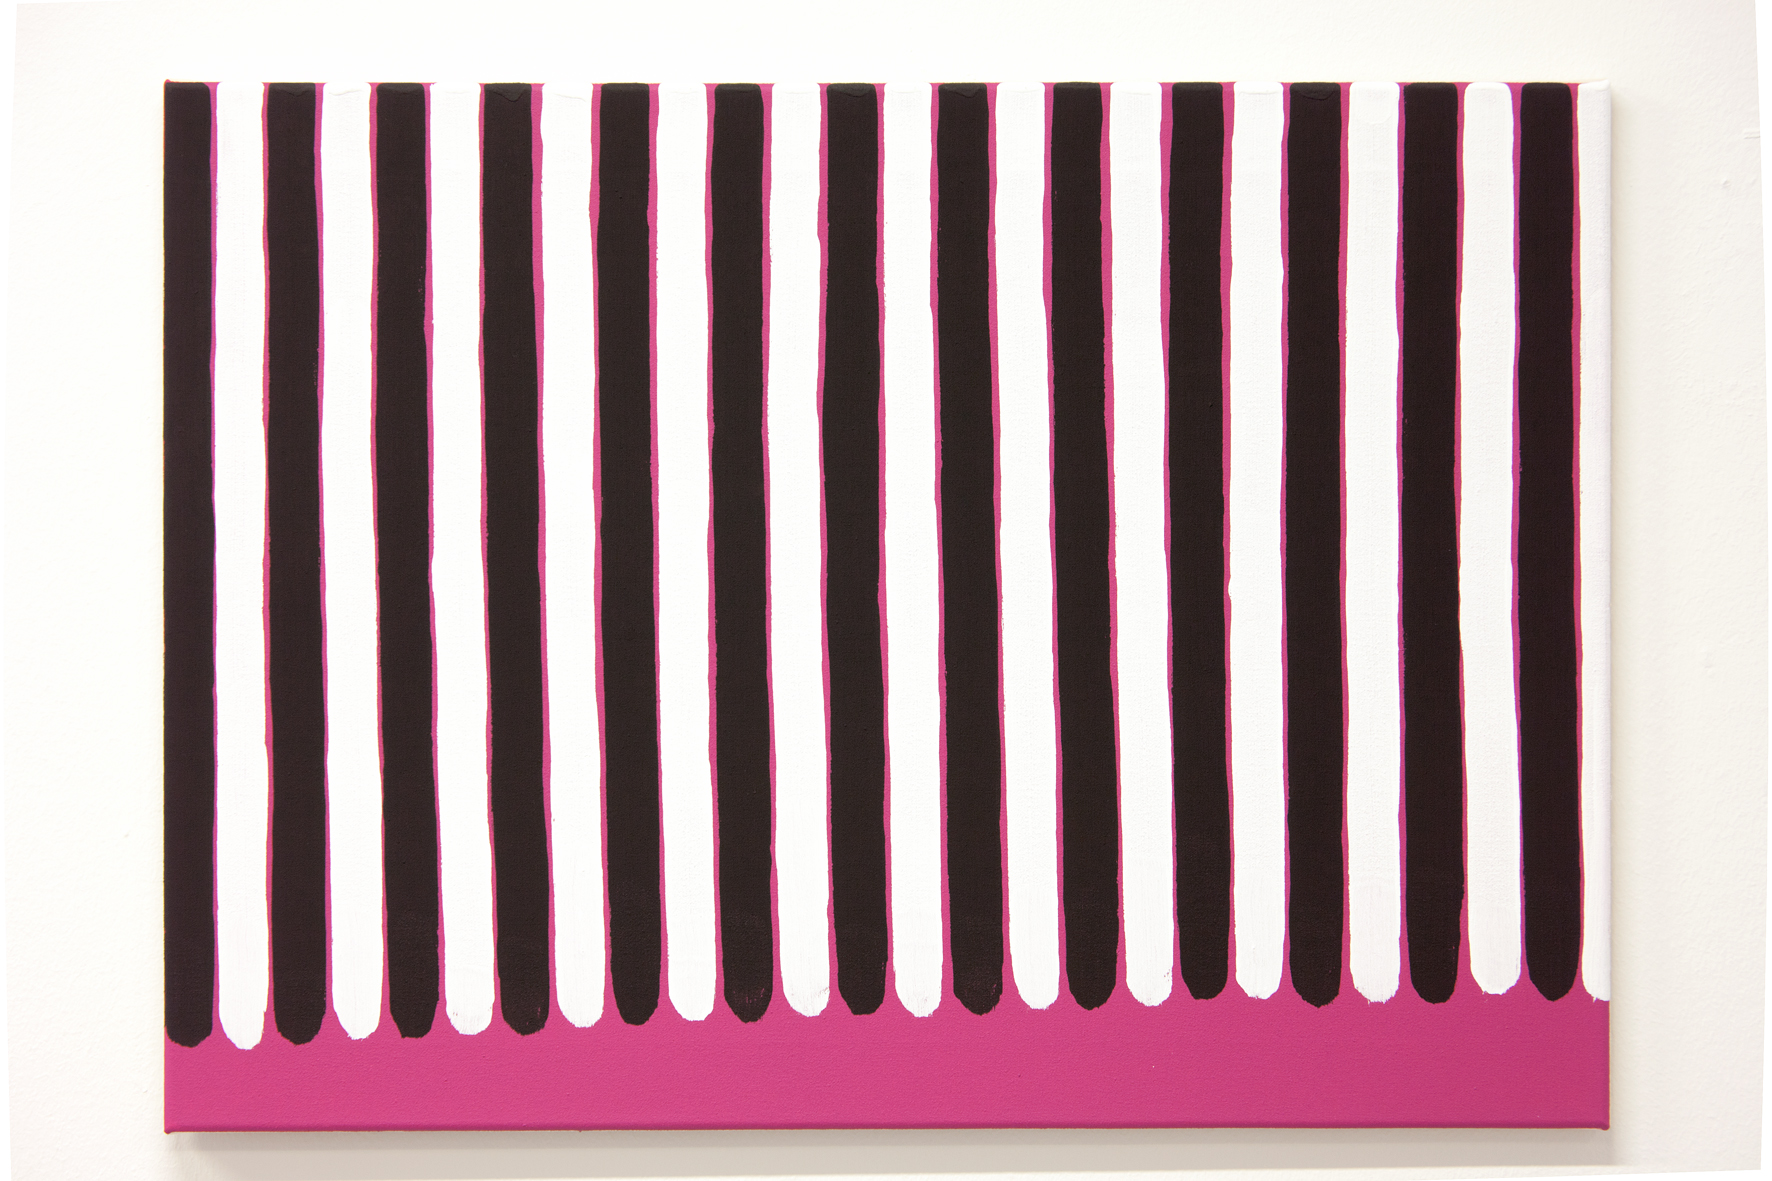 Holger Endres, 01 Magenta Schwarz Weiss (Tag 2), 2012, acrylic on cotton, 50 x 70 cm